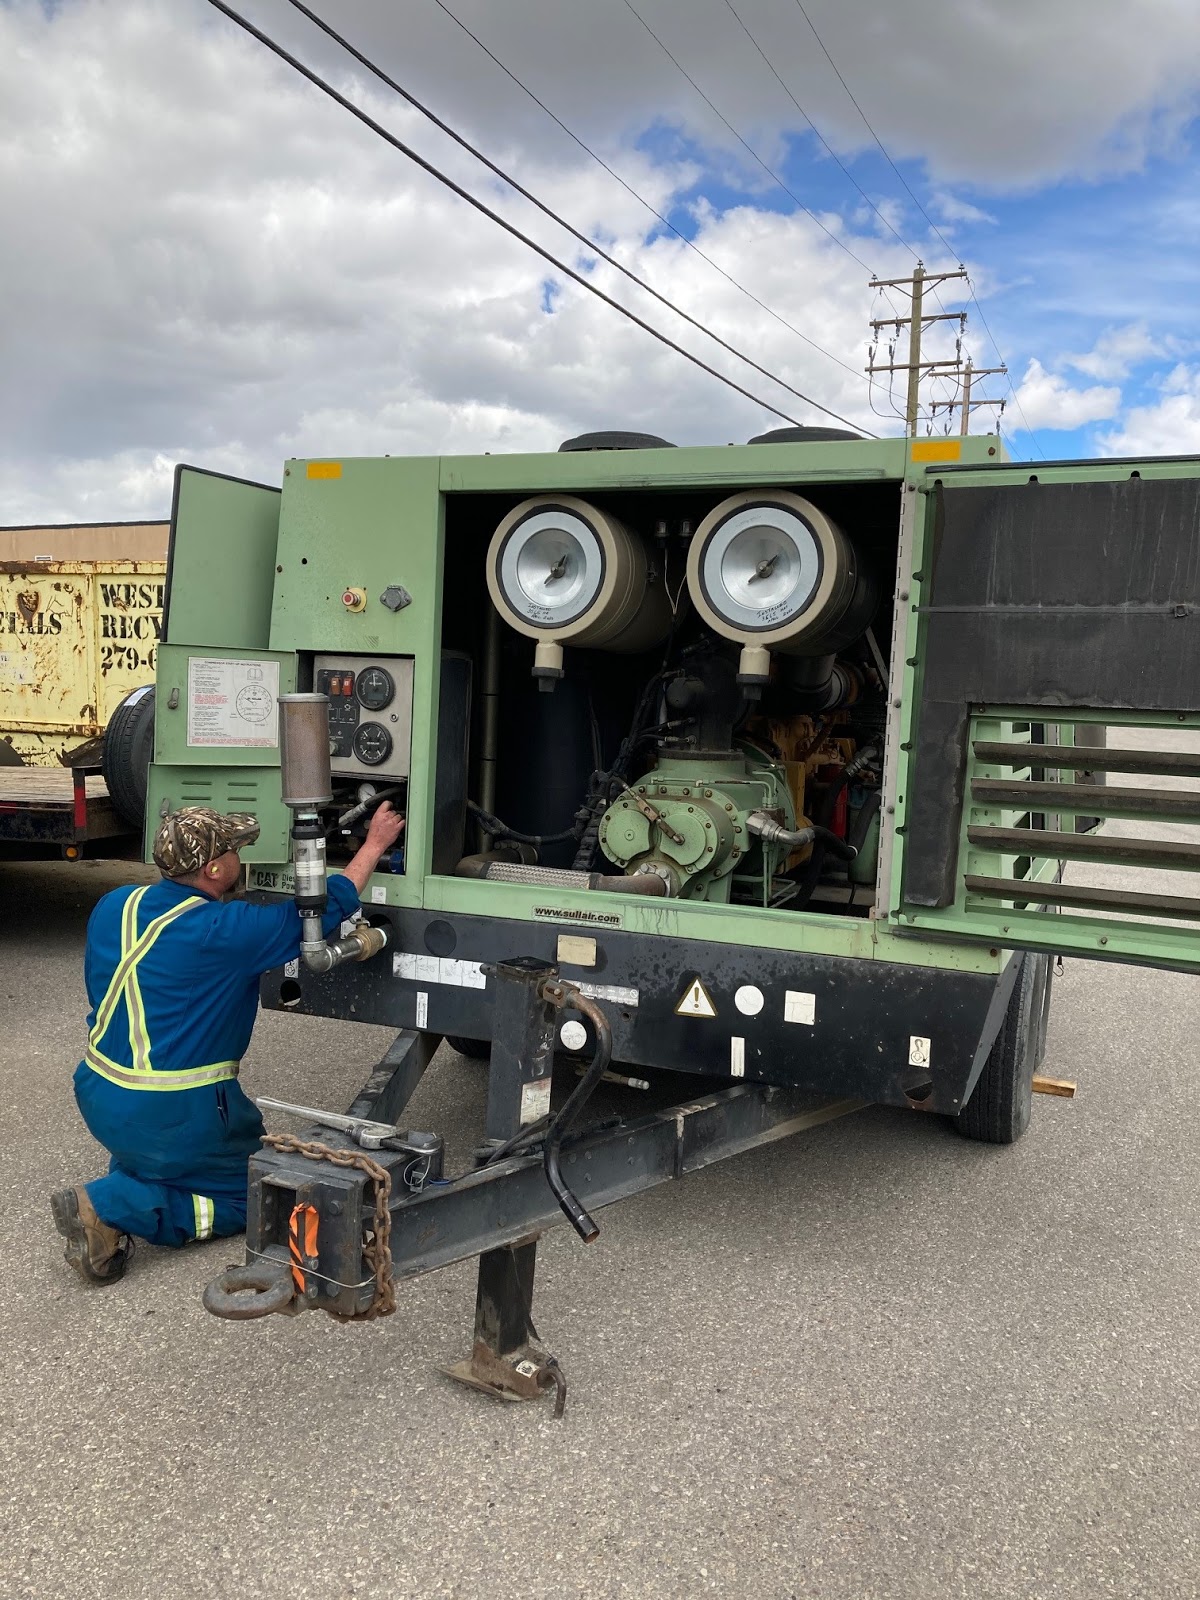 A portable compressor being serviced